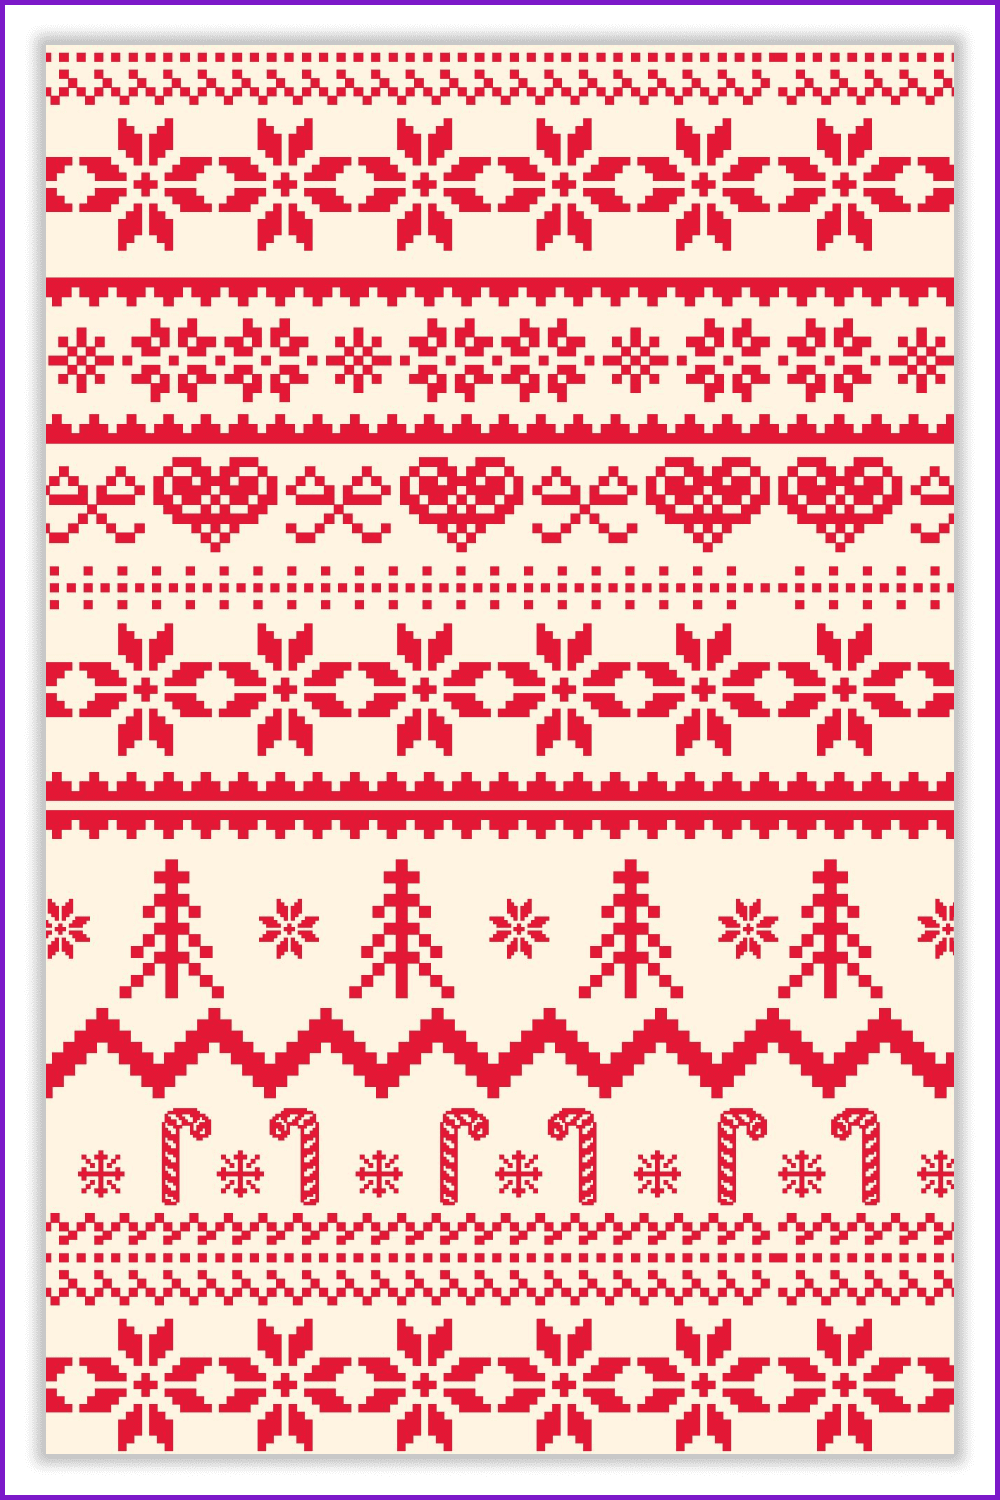 Image of an ethnic pattern with Christmas trees and red snowflakes on a beige background.